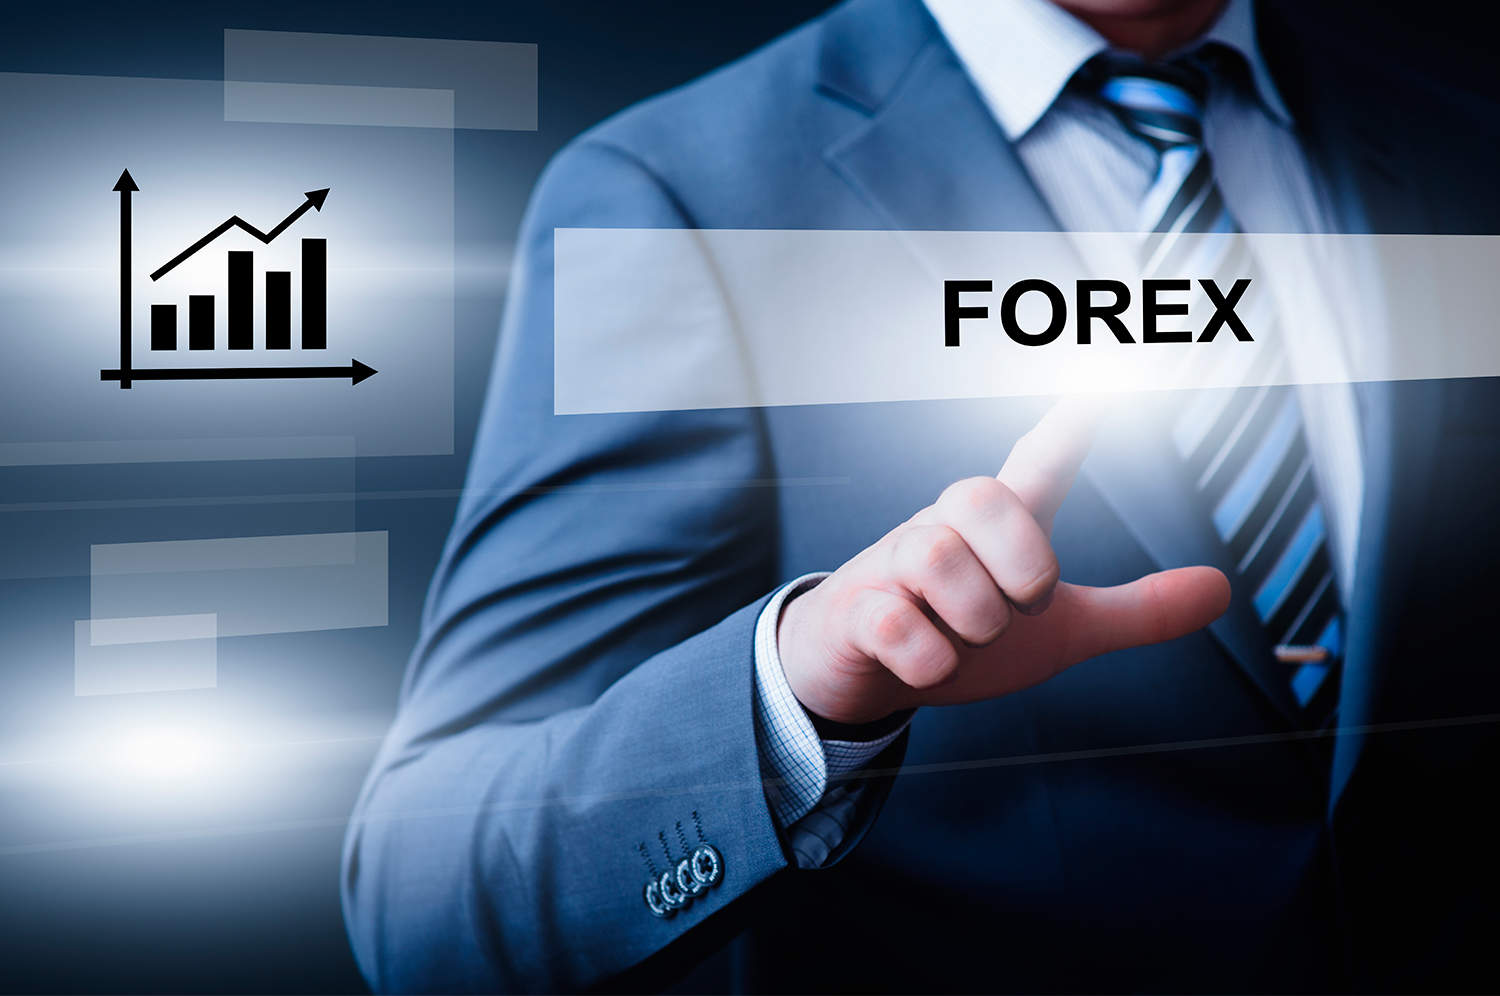 Can you trade forex over the weekend